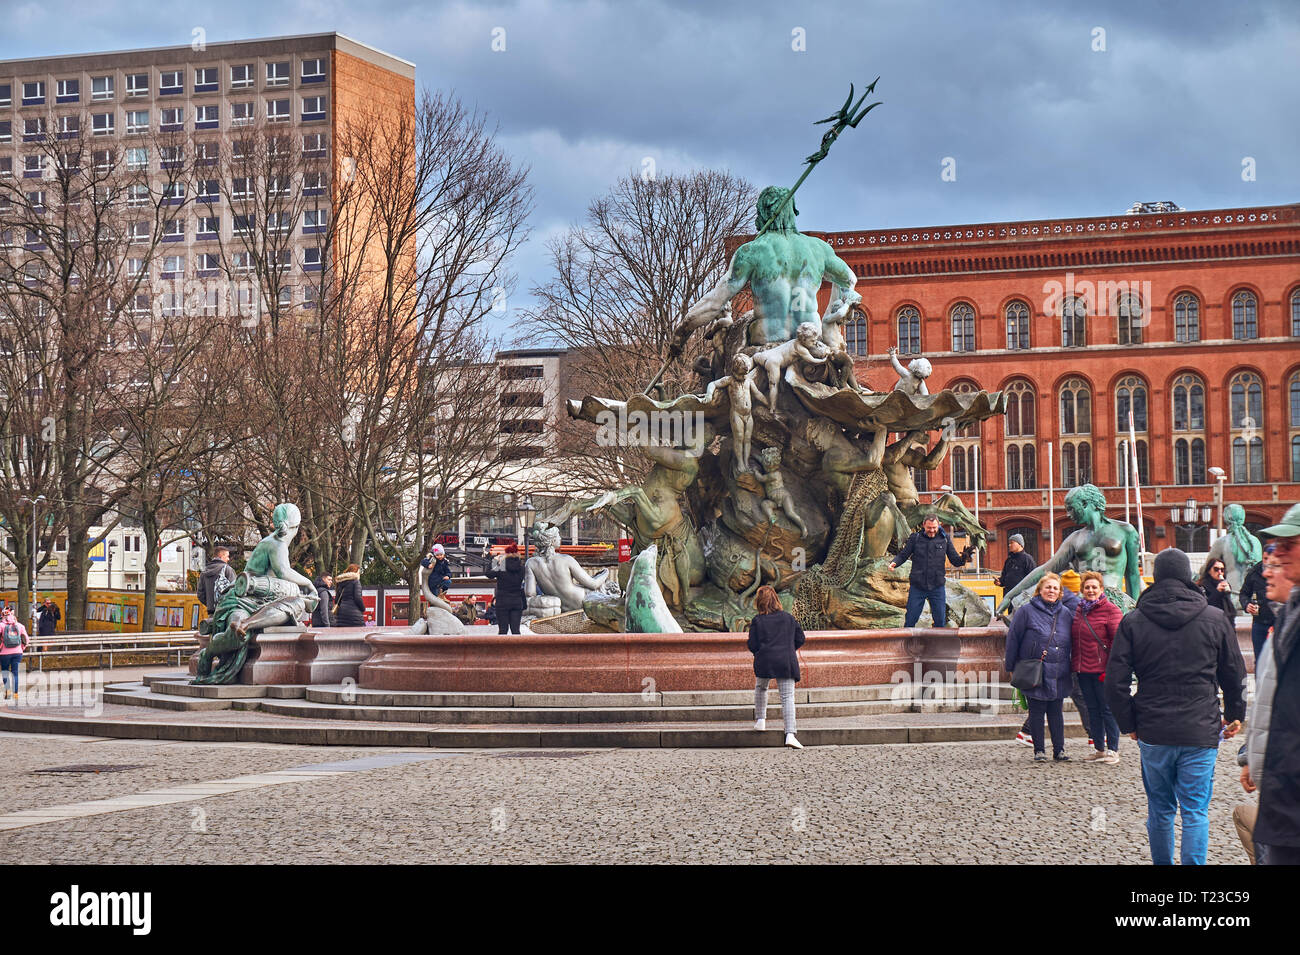 The antique Neptune Fountain built in 1891 designed by Reinhold Begas in a cold end of winter day in Berlin, Germany Stock Photo